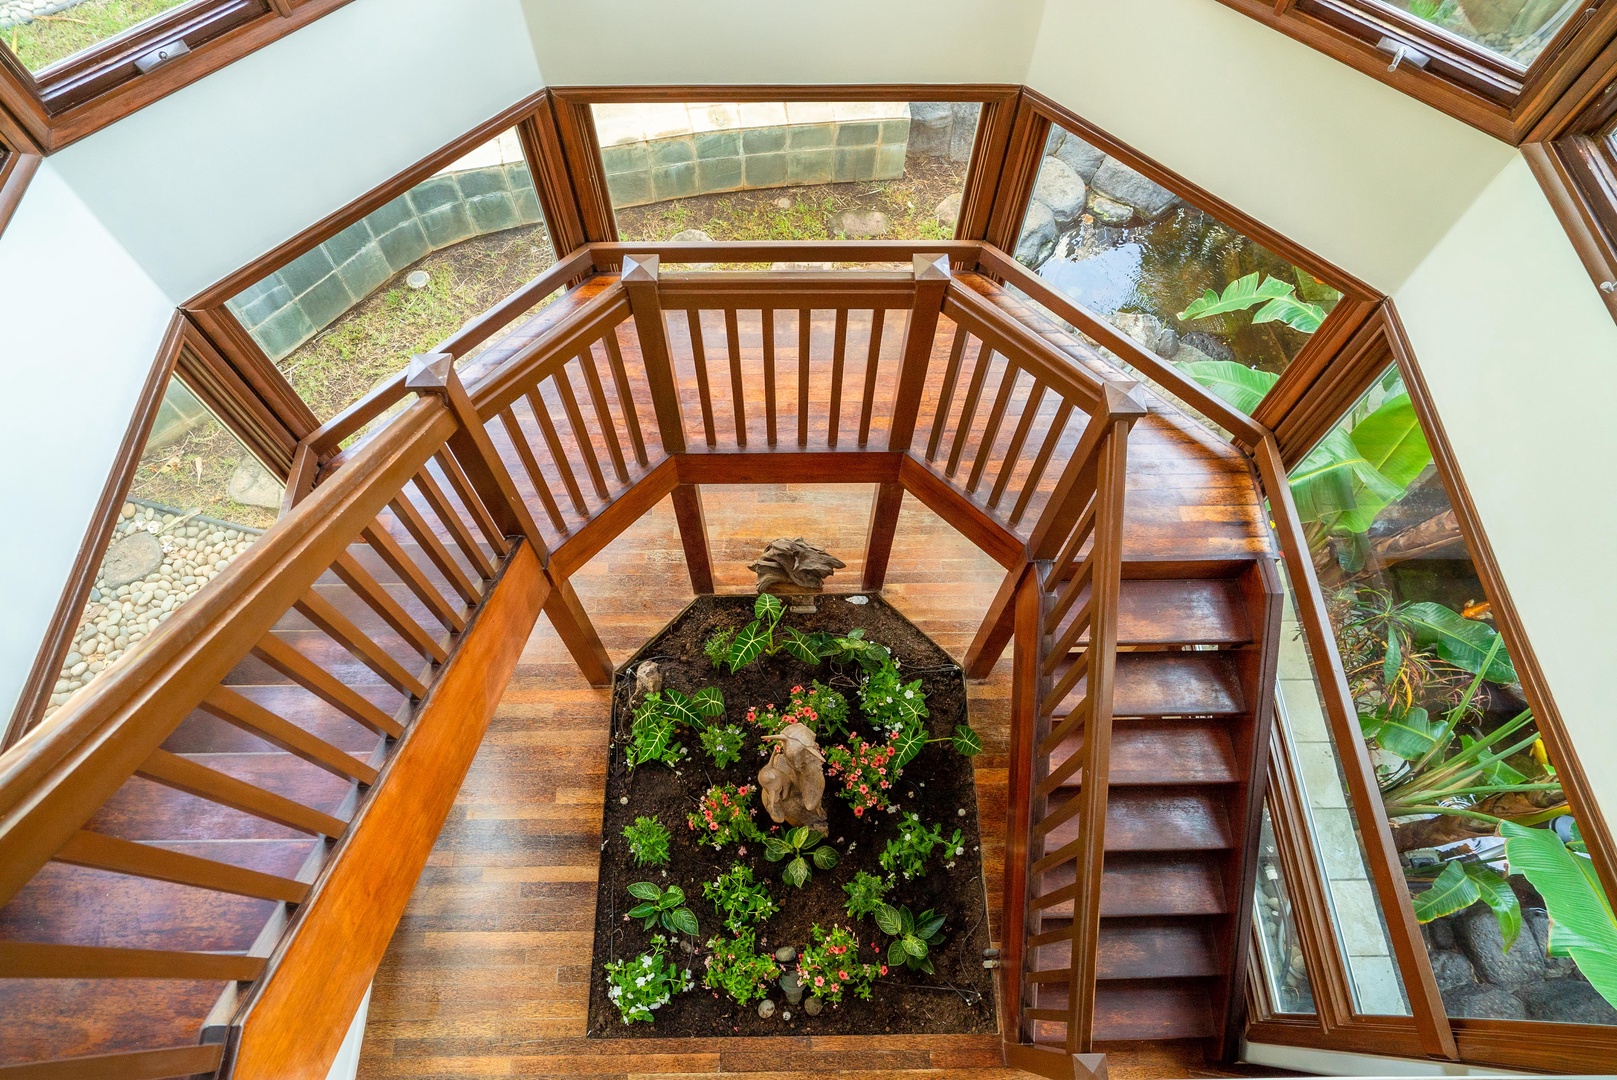 Honolulu Vacation Rentals, Kaiko'o Villa* - Beautiful wooden stairs lead to the top floor